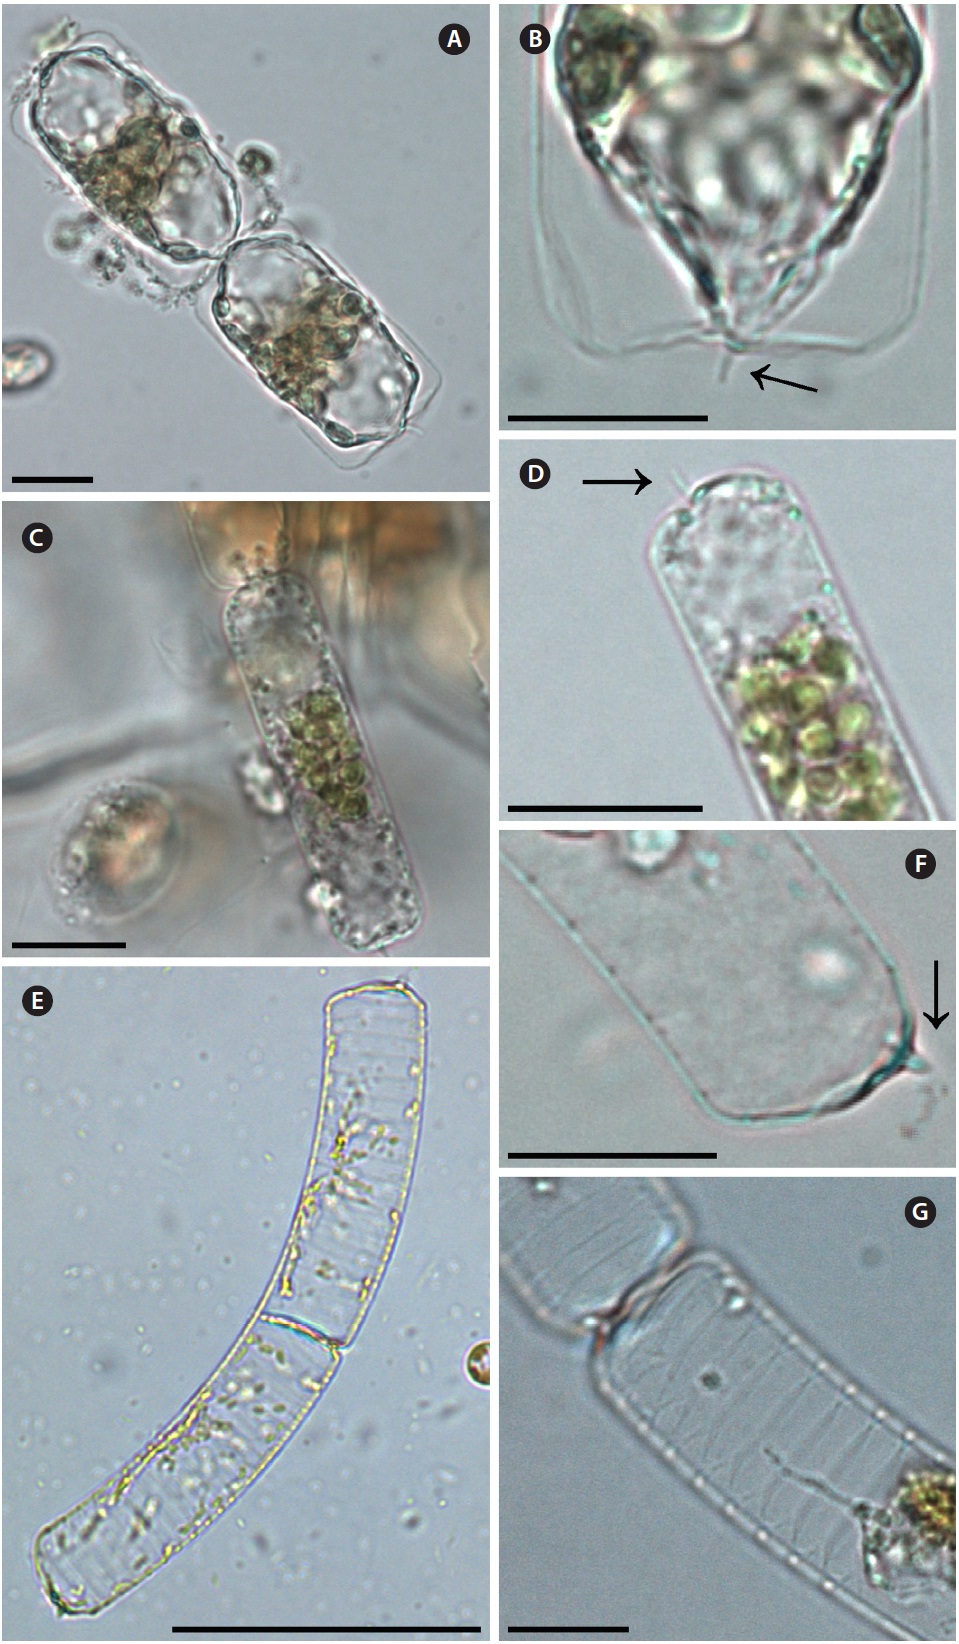 Dactyliosolen fragilissimus. (A) Chain formed two cells light microscopy (LM). (B) Detail of external process in valve apex (arrow), LM. (C) Chain formed two cells, LM. (D) Detail of external process in valve apex (arrow), LM. (E-G) Dactyliosolen phuketensis. (E) Chain formed two cells, LM. (F) Apical part of valve, external process in valve marginal, LM. (G) Detailed girdle bands, half band, LM. Scale bars represent: A-D, F & G, 10 μm; E, 50 μm.